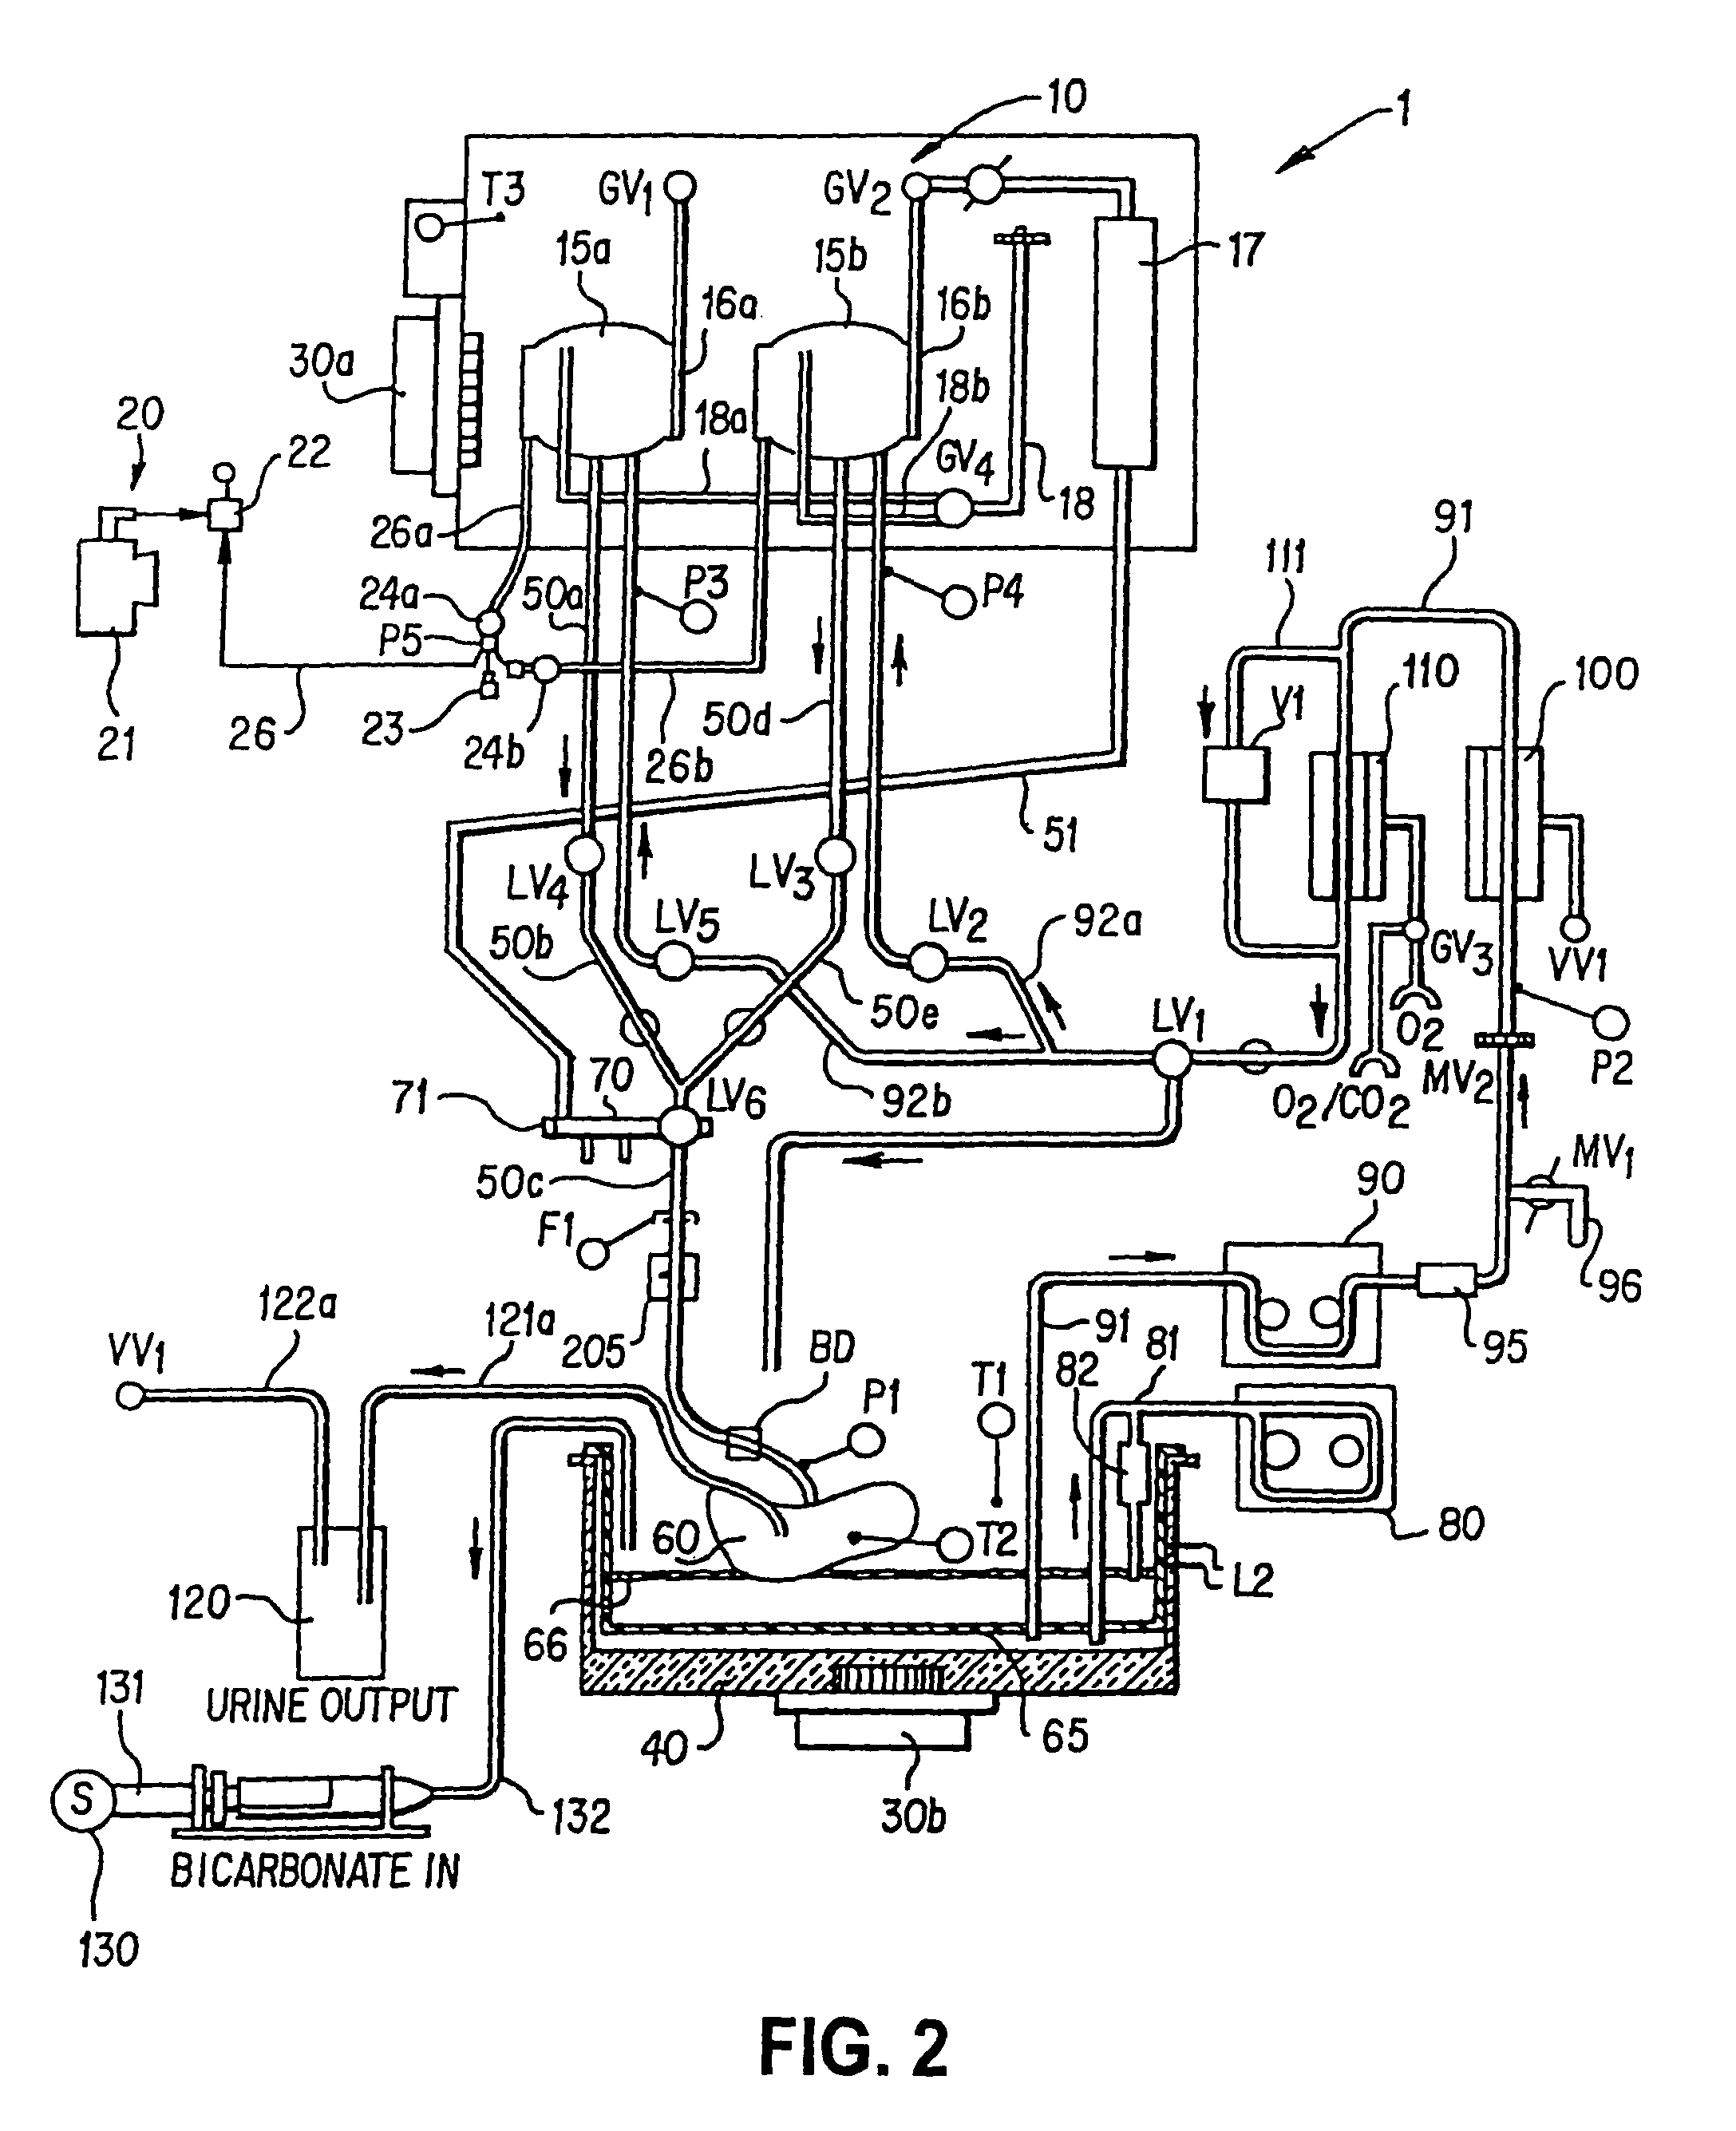 Apparatus and method for maintaining and/or restoring viability of organs